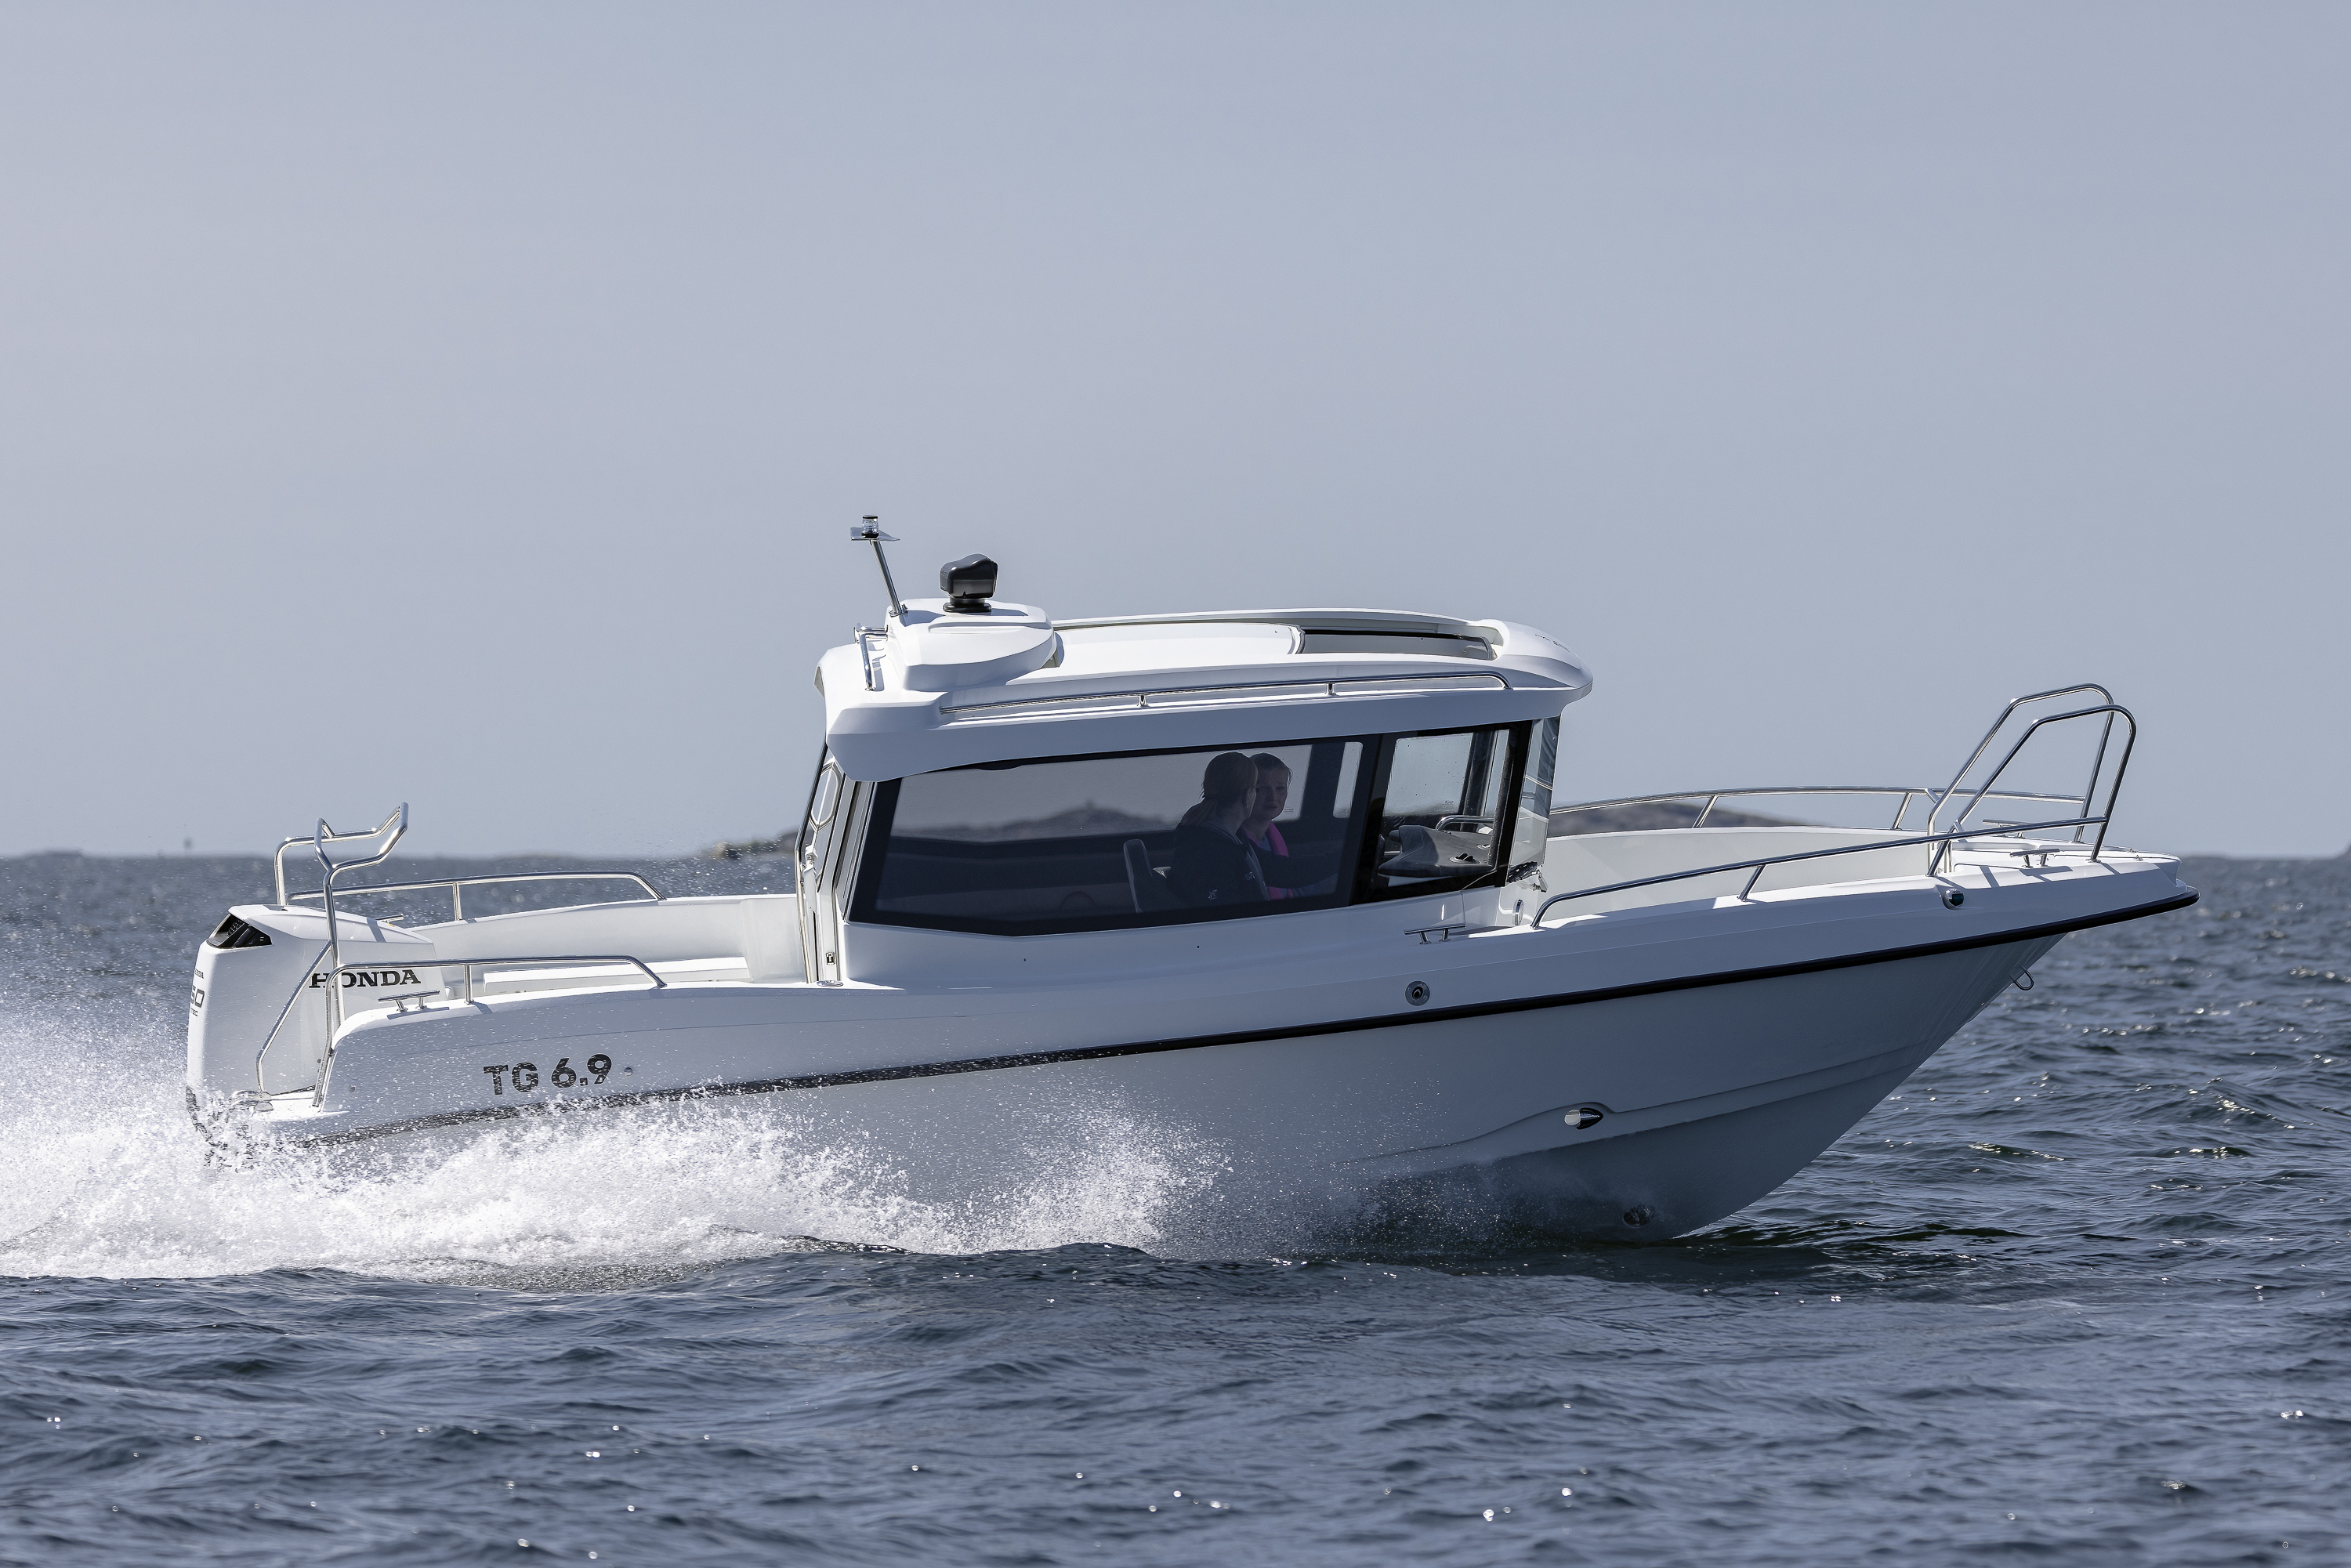 TG 6.9 cabin boat drives on open sea in the outer Finnish archipelago.